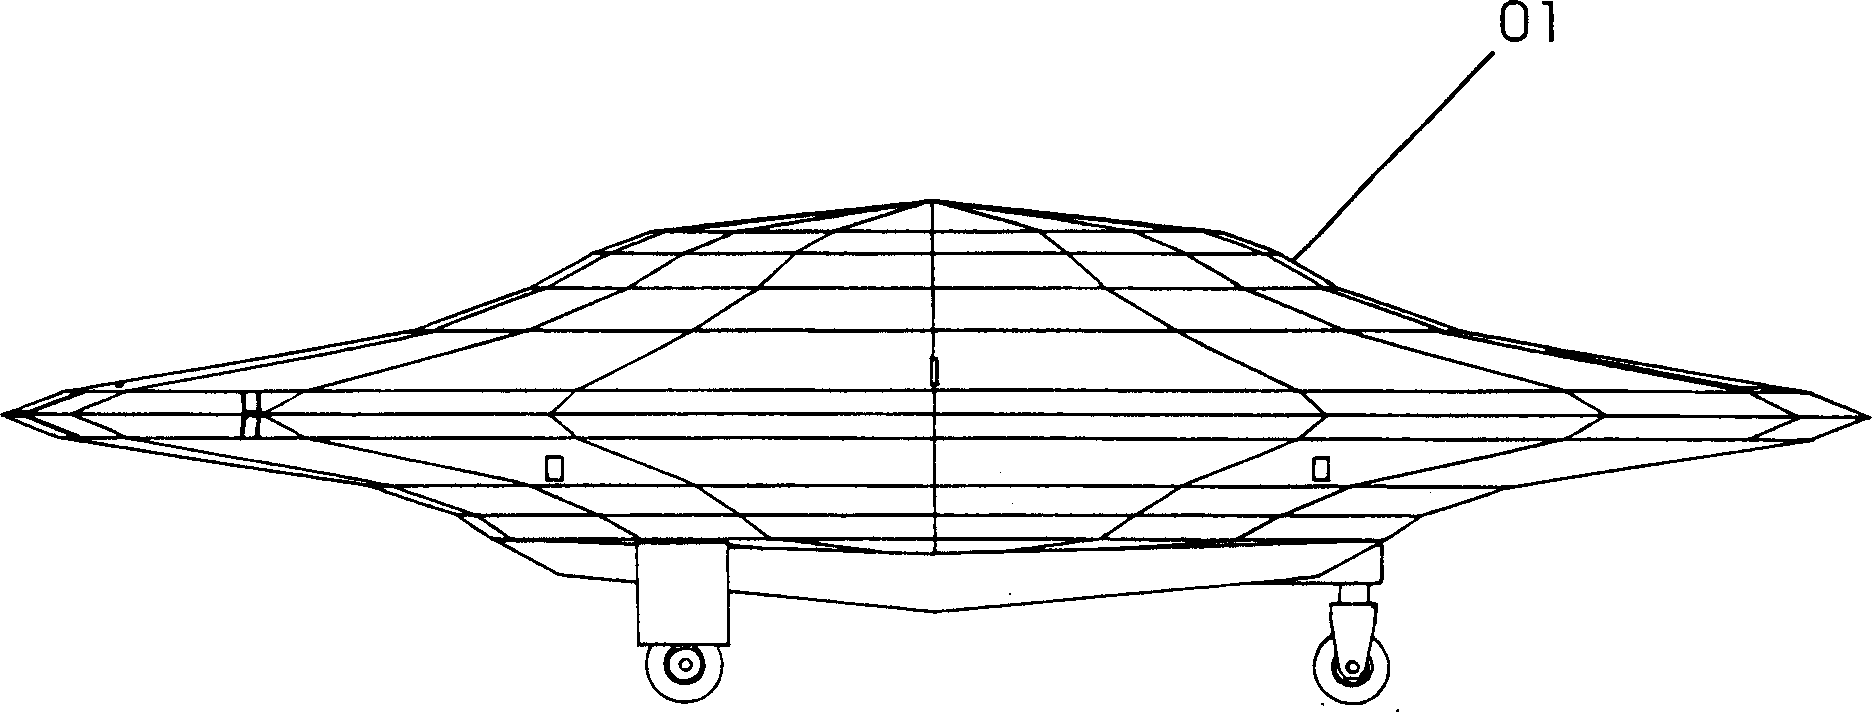 Contour structure of aircraft